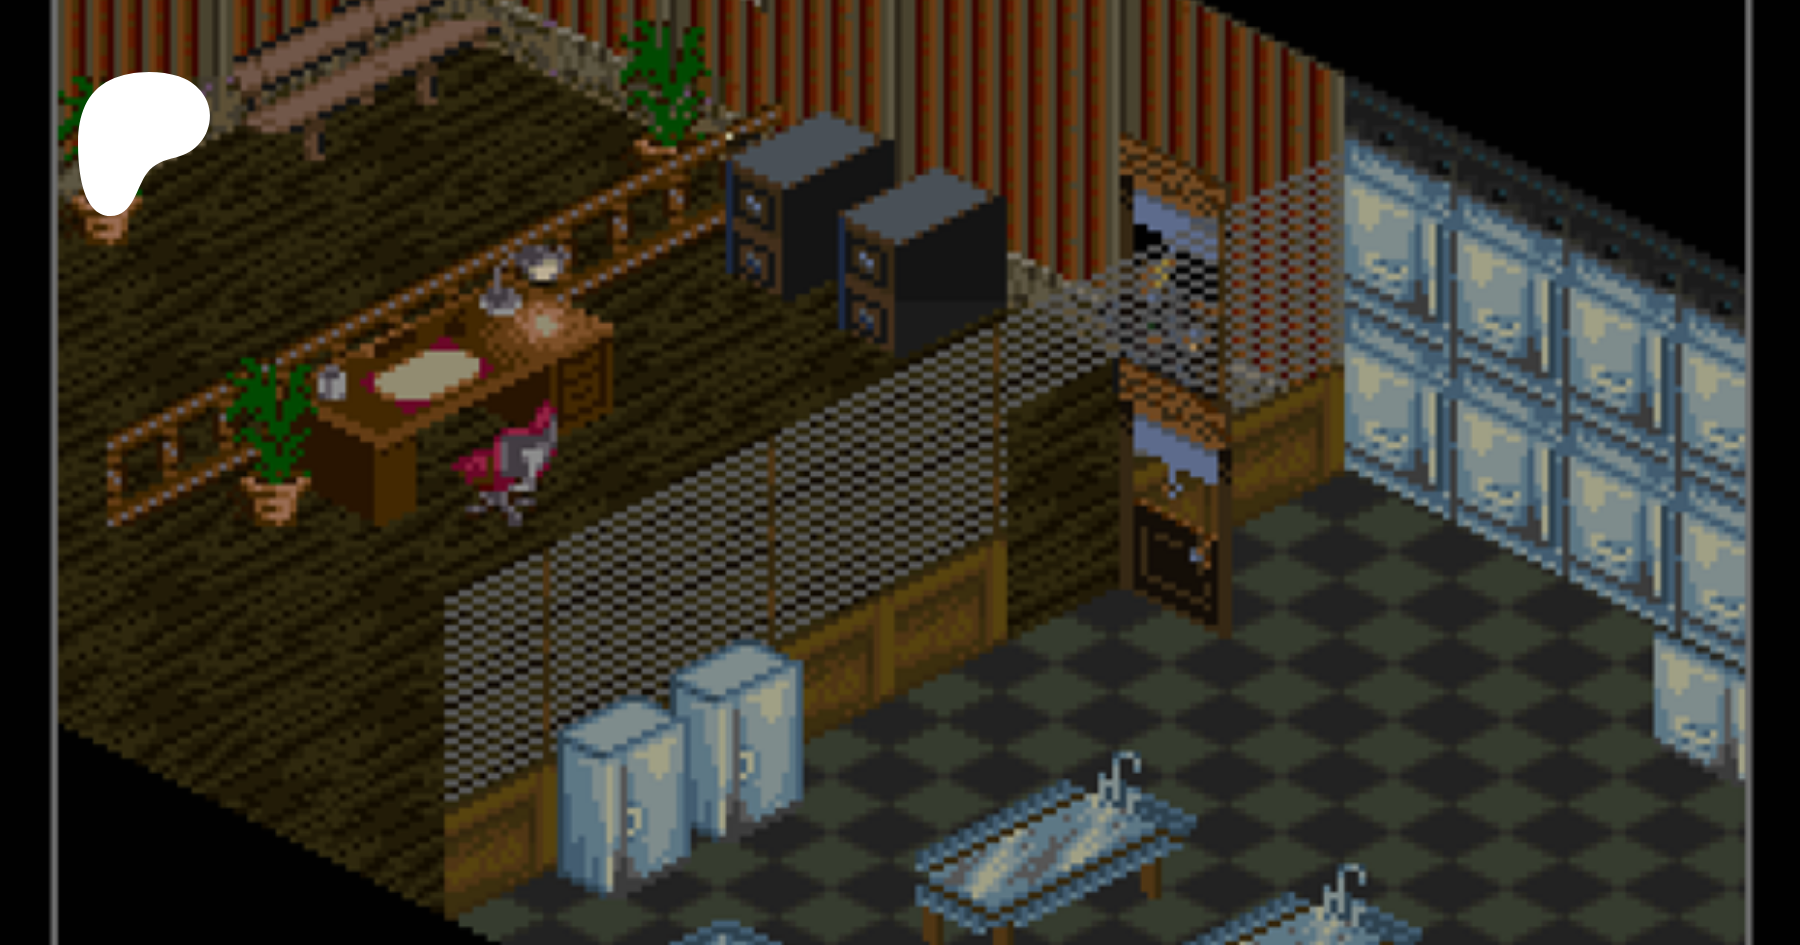 SNES Mouse support for Shadowrun